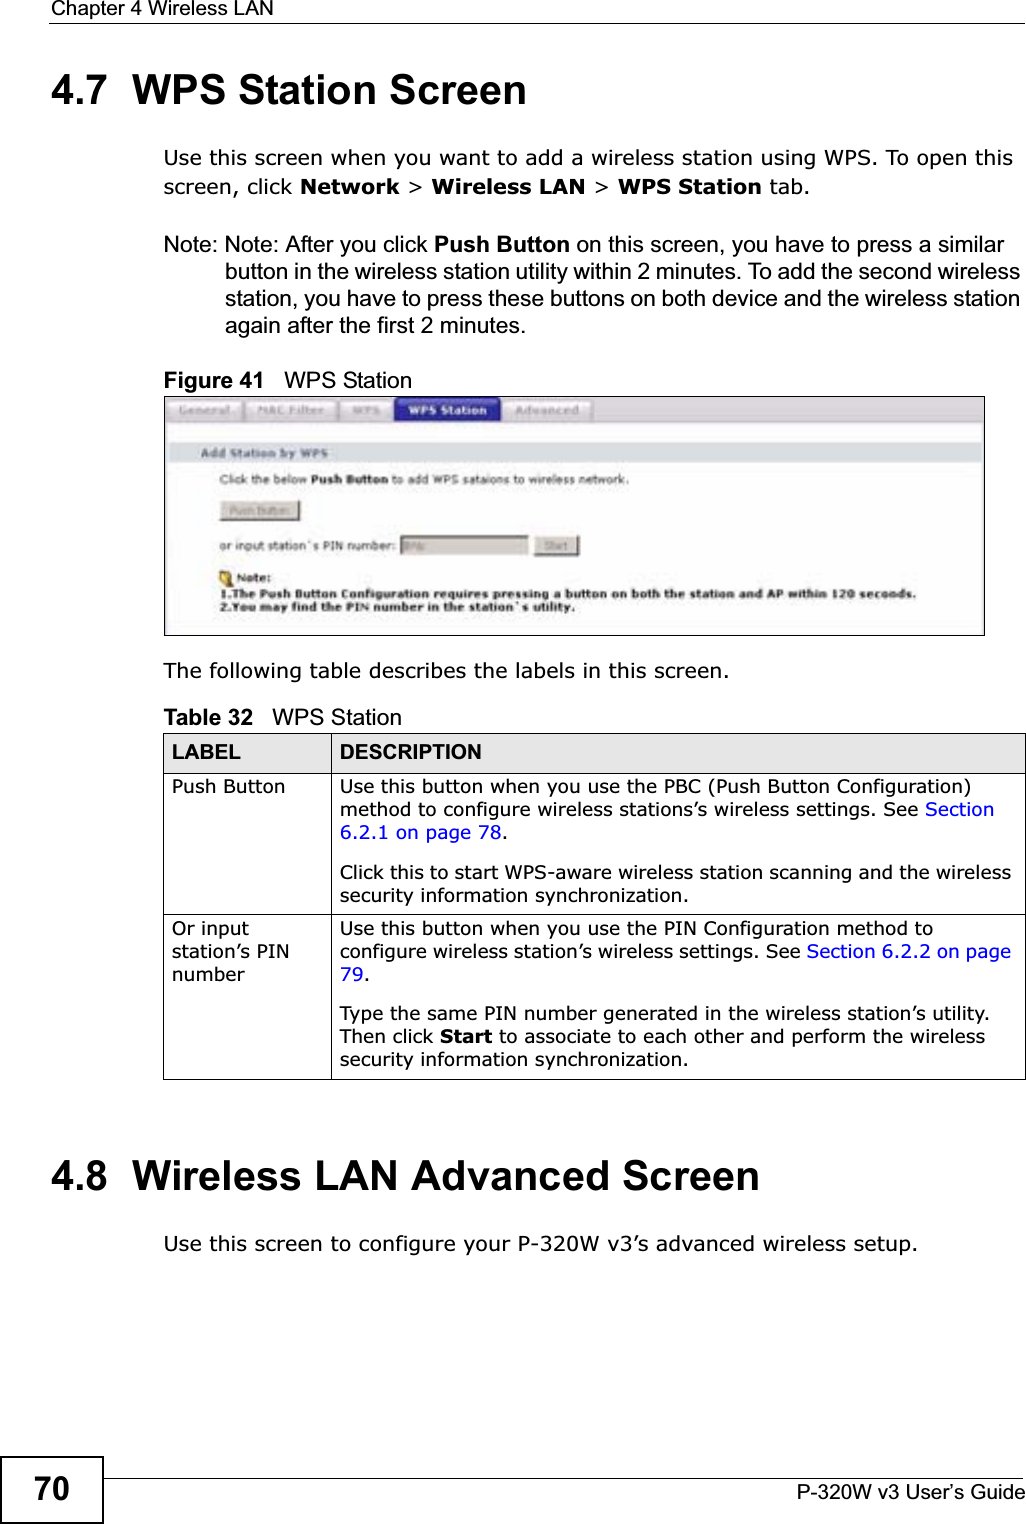 Chapter 4 Wireless LANP-320W v3 User’s Guide704.7  WPS Station ScreenUse this screen when you want to add a wireless station using WPS. To open this screen, click Network &gt; Wireless LAN &gt; WPS Station tab.Note: Note: After you click Push Button on this screen, you have to press a similar button in the wireless station utility within 2 minutes. To add the second wireless station, you have to press these buttons on both device and the wireless station again after the first 2 minutes.Figure 41   WPS StationThe following table describes the labels in this screen.4.8  Wireless LAN Advanced ScreenUse this screen to configure your P-320W v3’s advanced wireless setup.Table 32   WPS StationLABEL DESCRIPTIONPush Button Use this button when you use the PBC (Push Button Configuration) method to configure wireless stations’s wireless settings. See Section 6.2.1 on page 78.Click this to start WPS-aware wireless station scanning and the wireless security information synchronization. Or input station’s PIN numberUse this button when you use the PIN Configuration method to configure wireless station’s wireless settings. See Section 6.2.2 on page 79.Type the same PIN number generated in the wireless station’s utility. Then click Start to associate to each other and perform the wireless security information synchronization. 